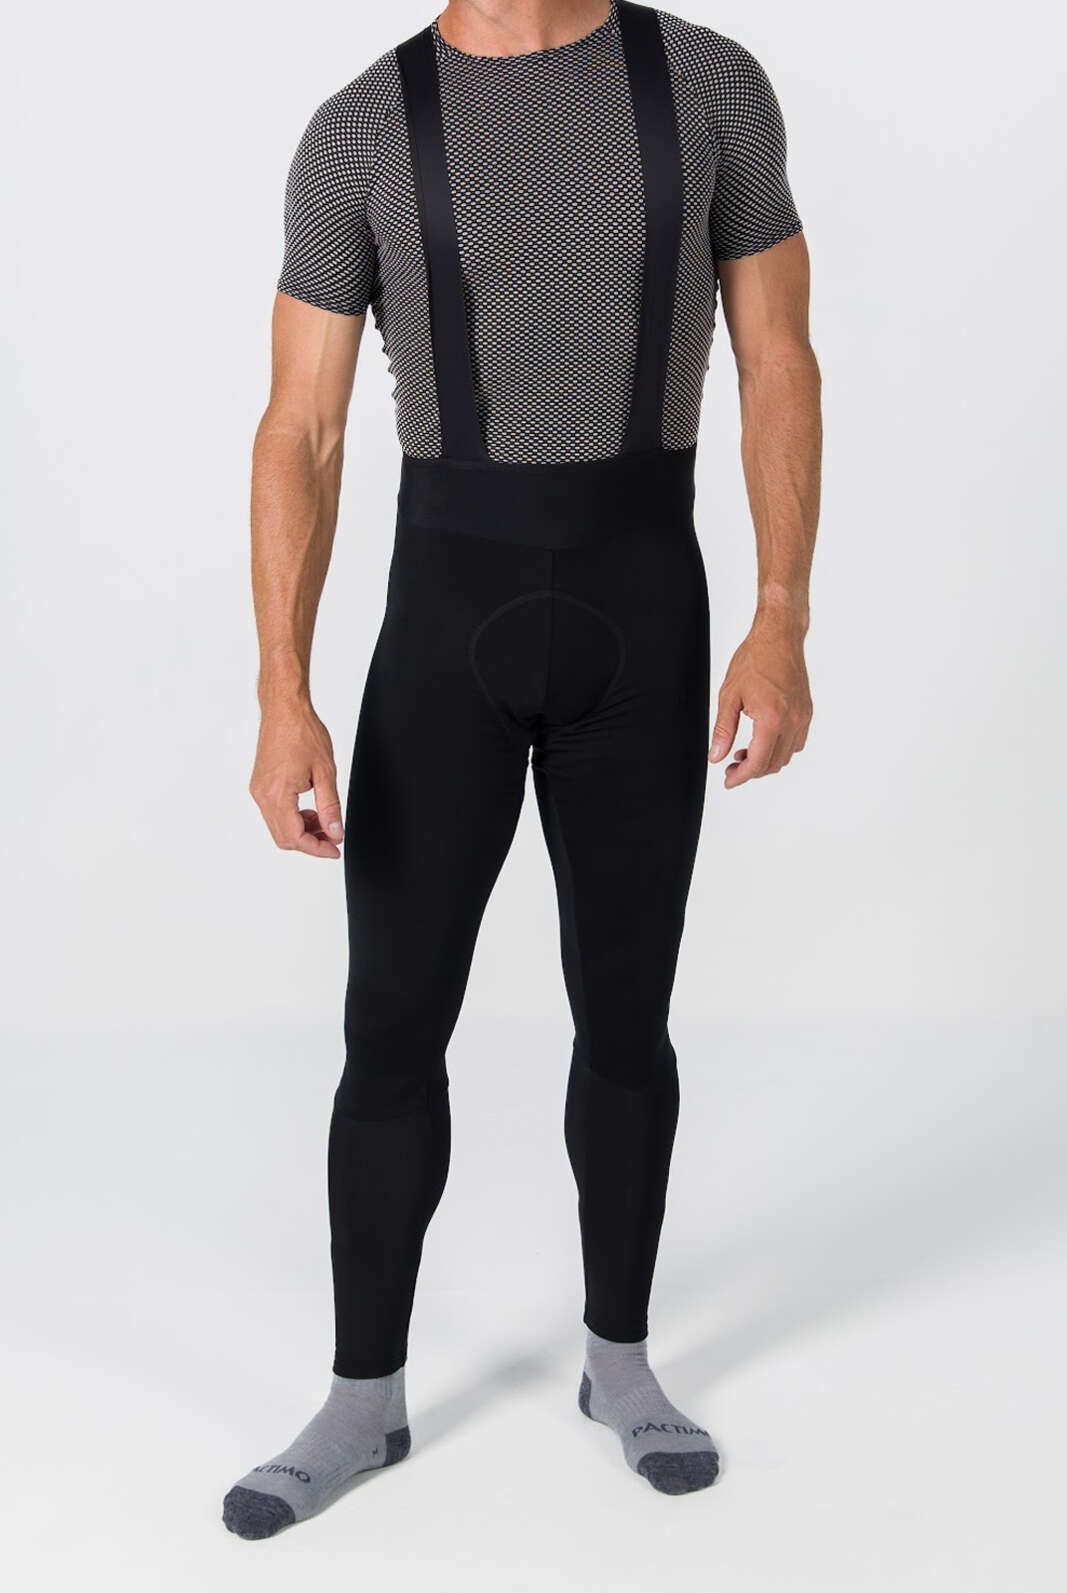 Men's Water-Repelling Thermal Cycling Bib Tights - Front View